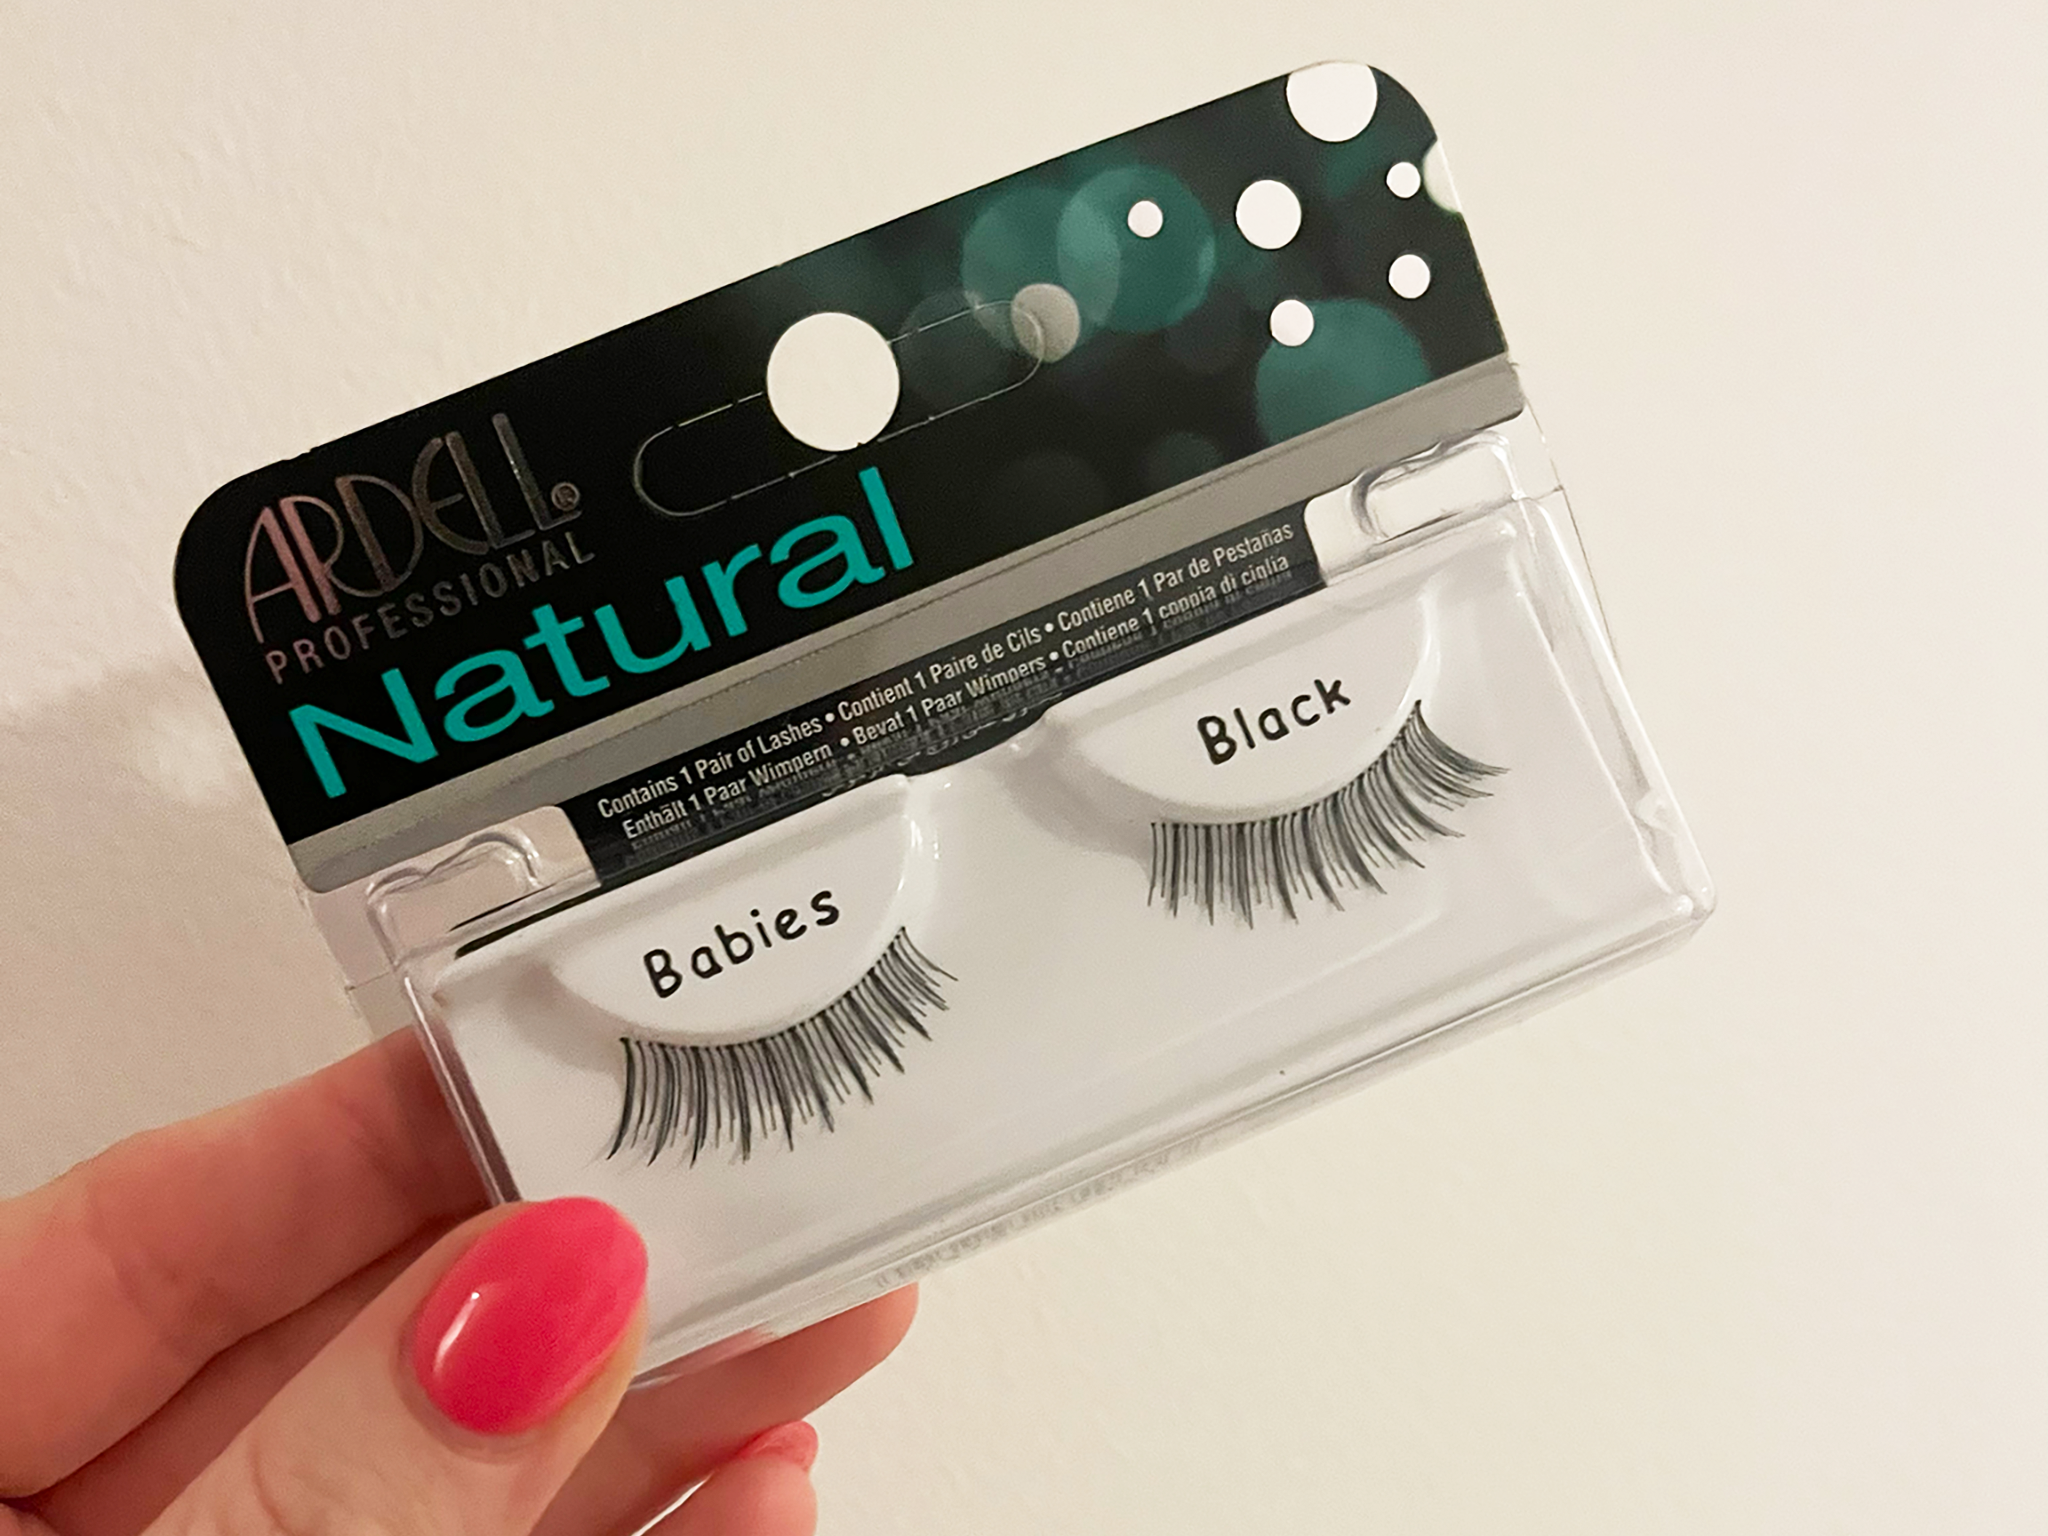 Ardell natural babies strip lashes